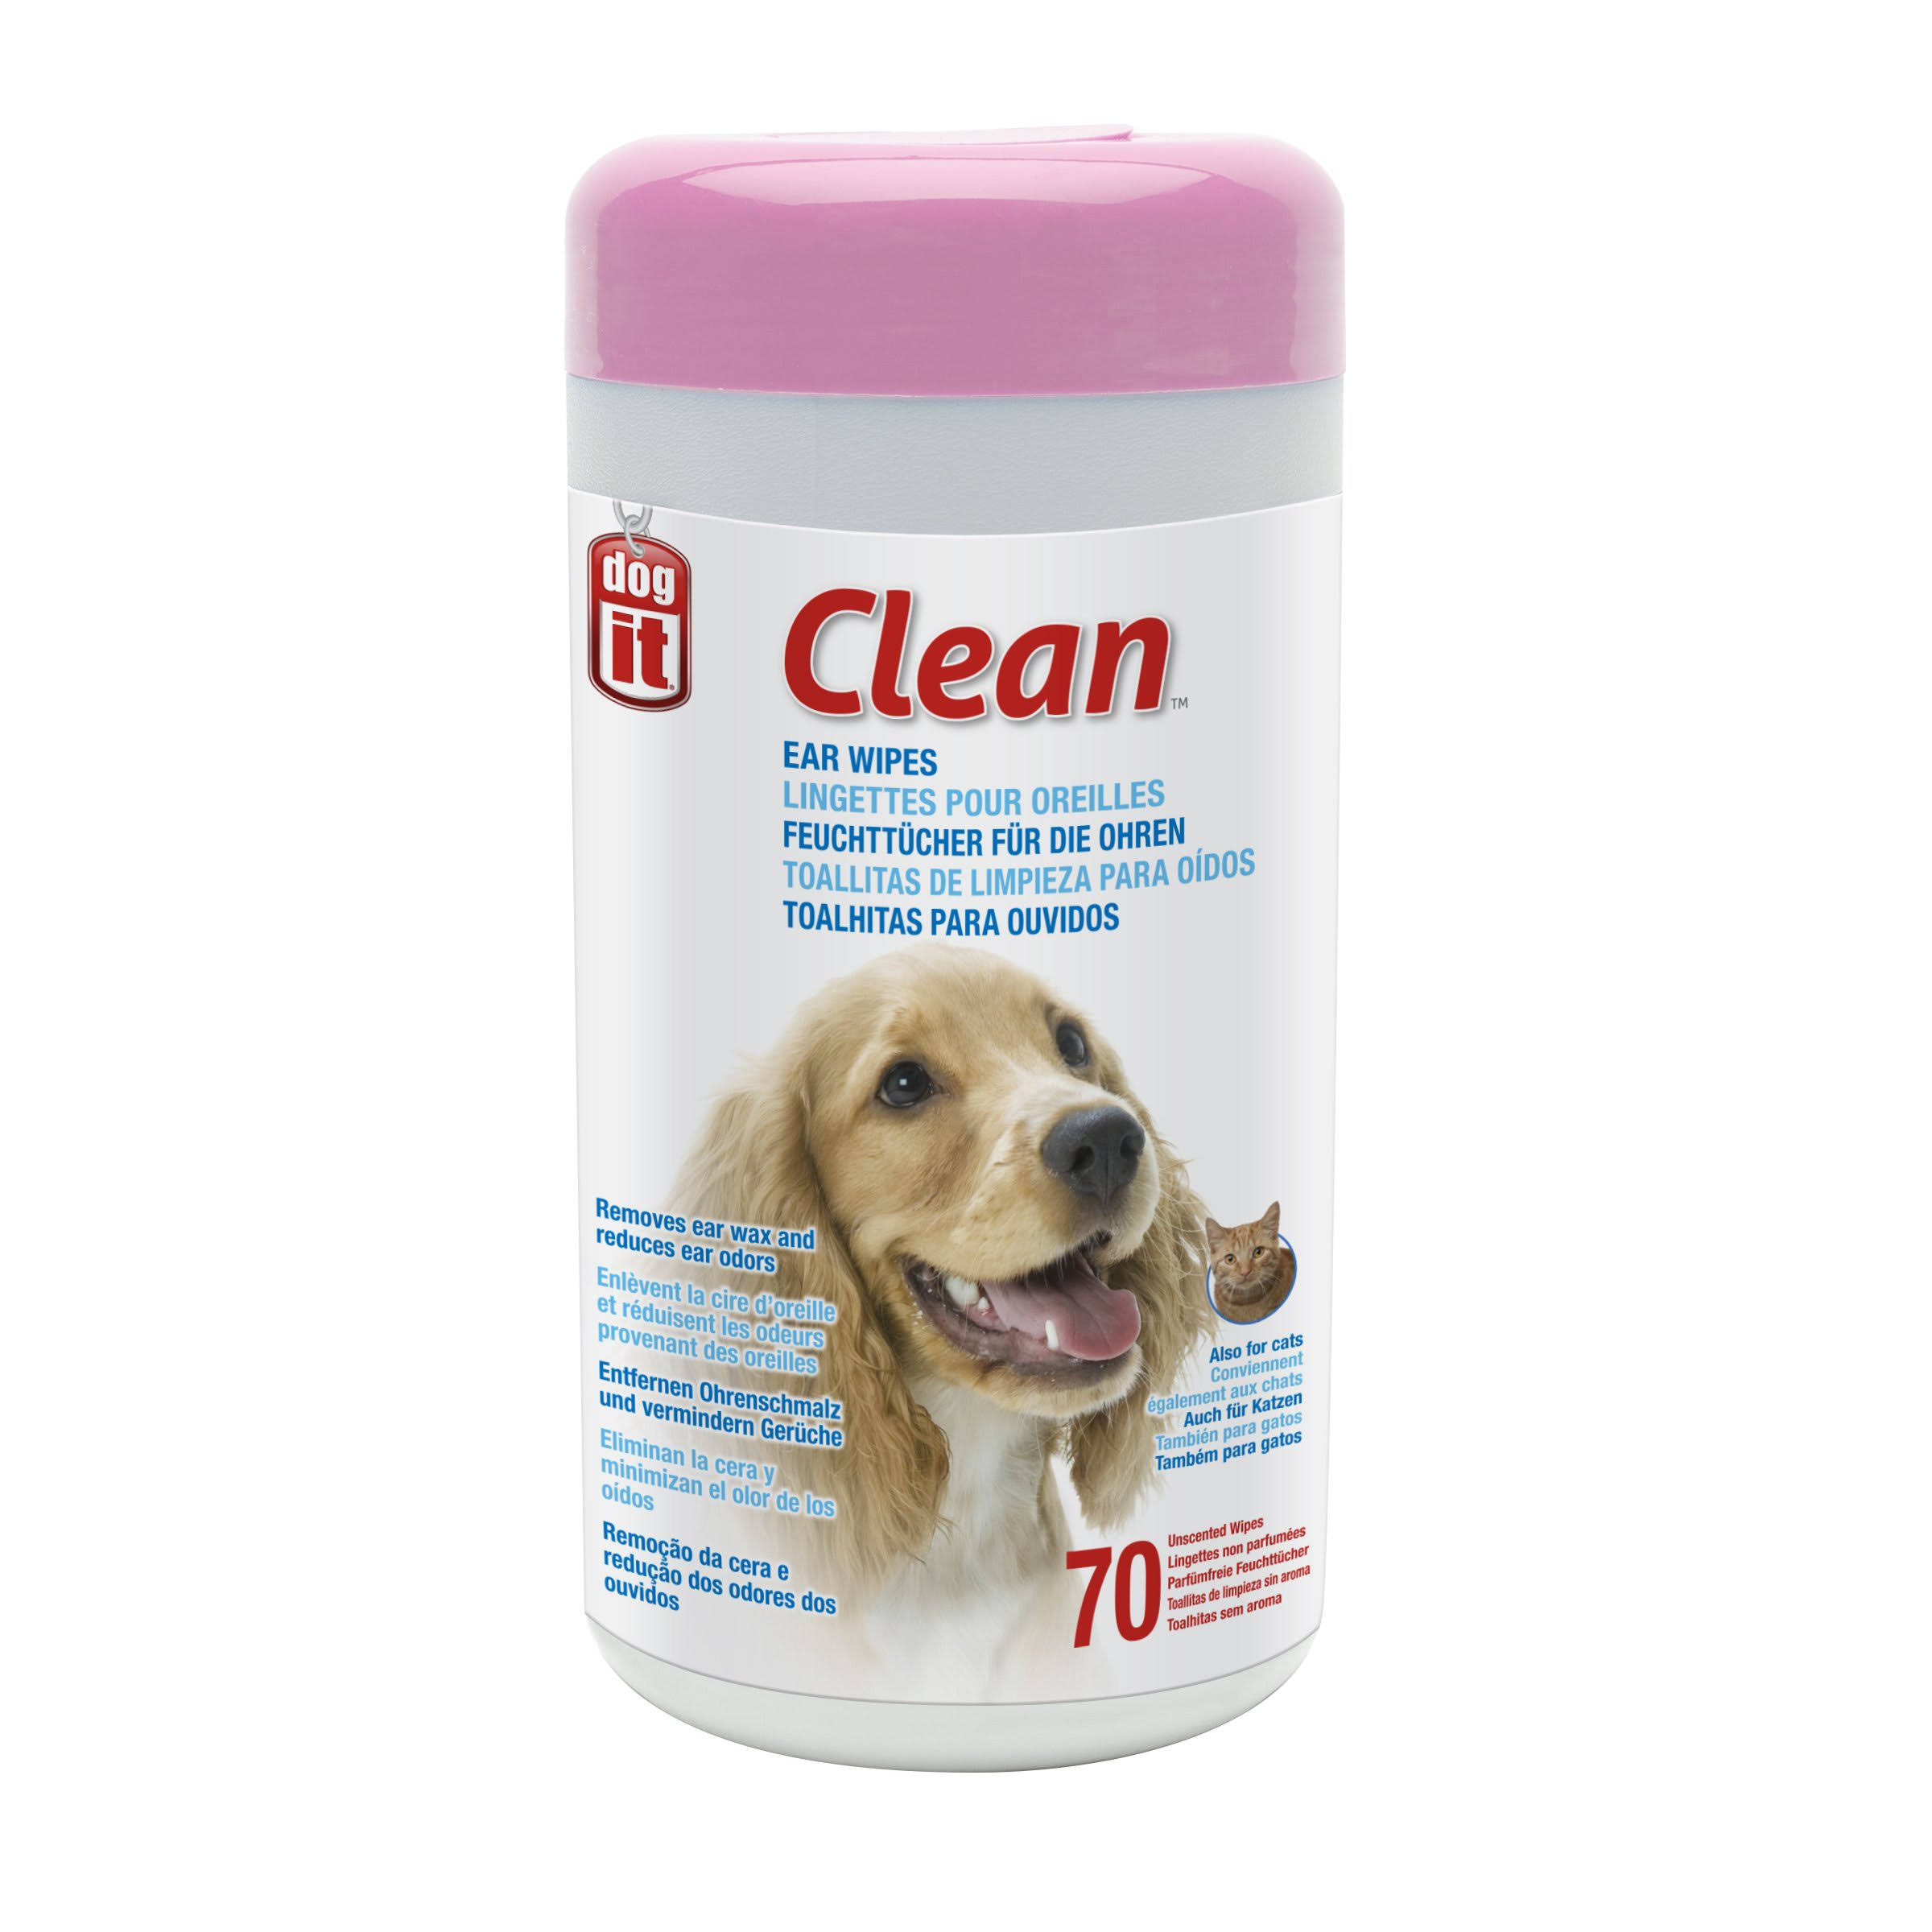 Dogit Clean Ear Wipes - 70ct